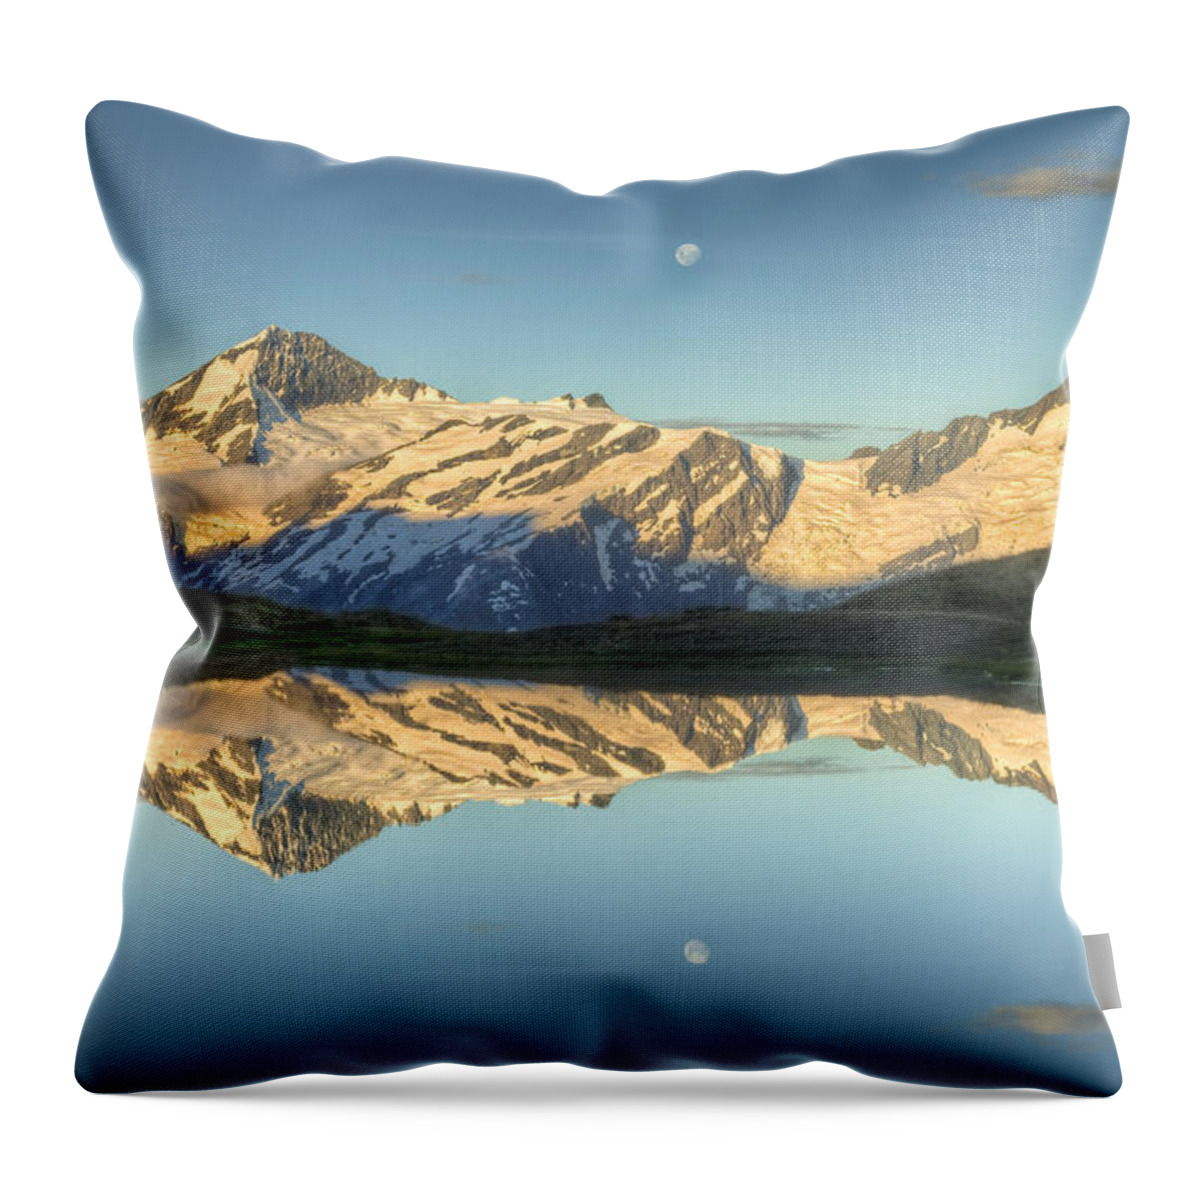 00441029 Throw Pillow featuring the photograph Mount Aspiring Moonrise Over Cascade #1 by Colin Monteath